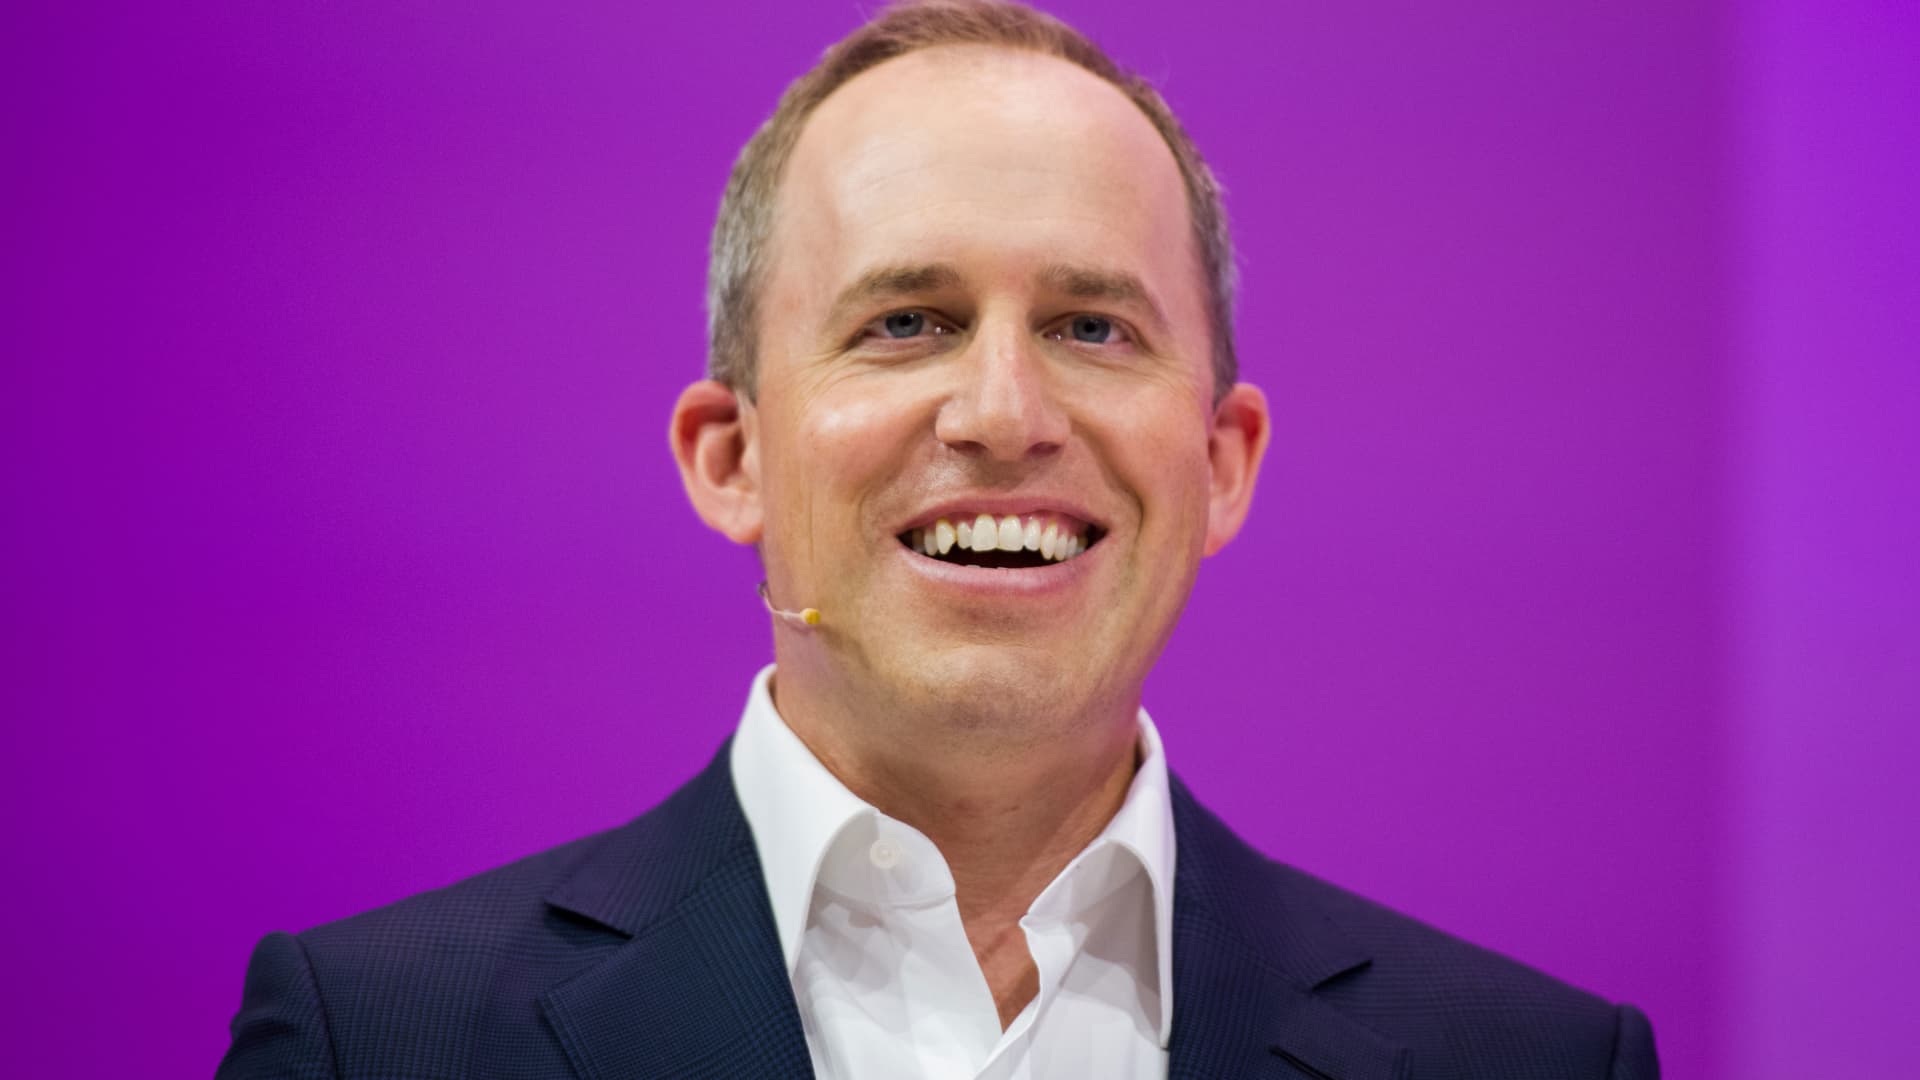 Here’s Bret Taylor’s first big technical move at Salesforce as co-CEO